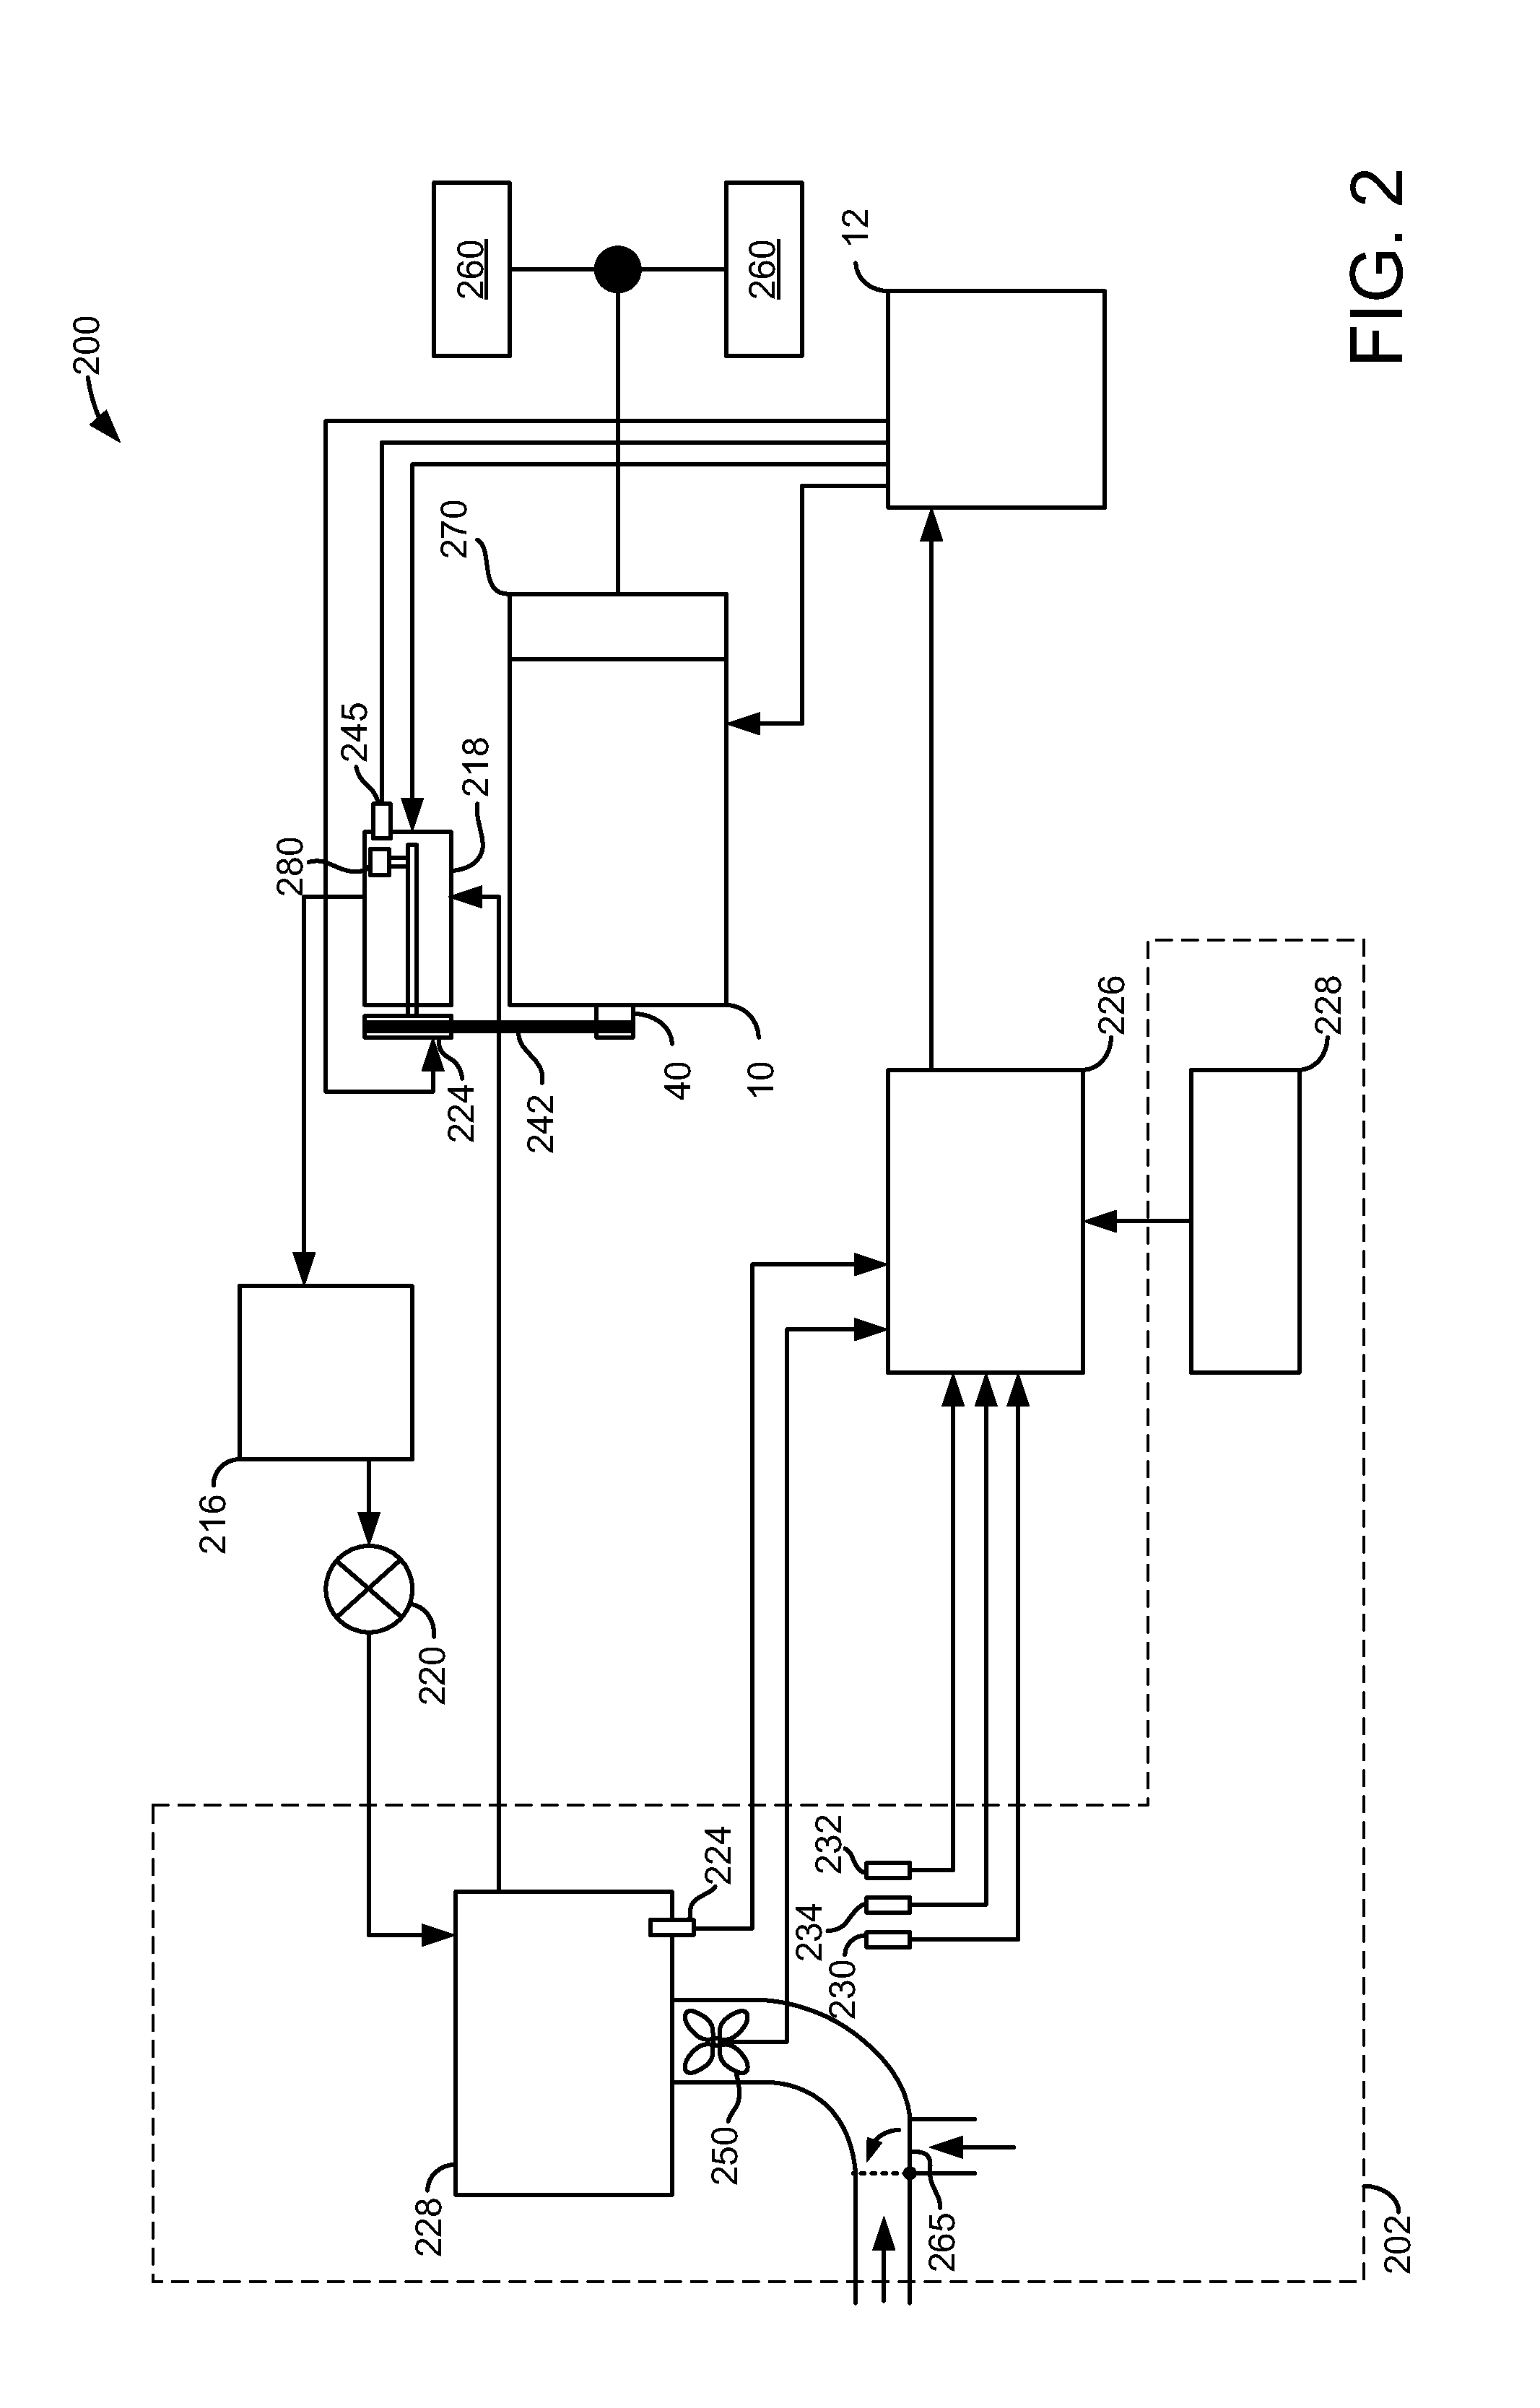 System and method for generating vacuum for a vehicle